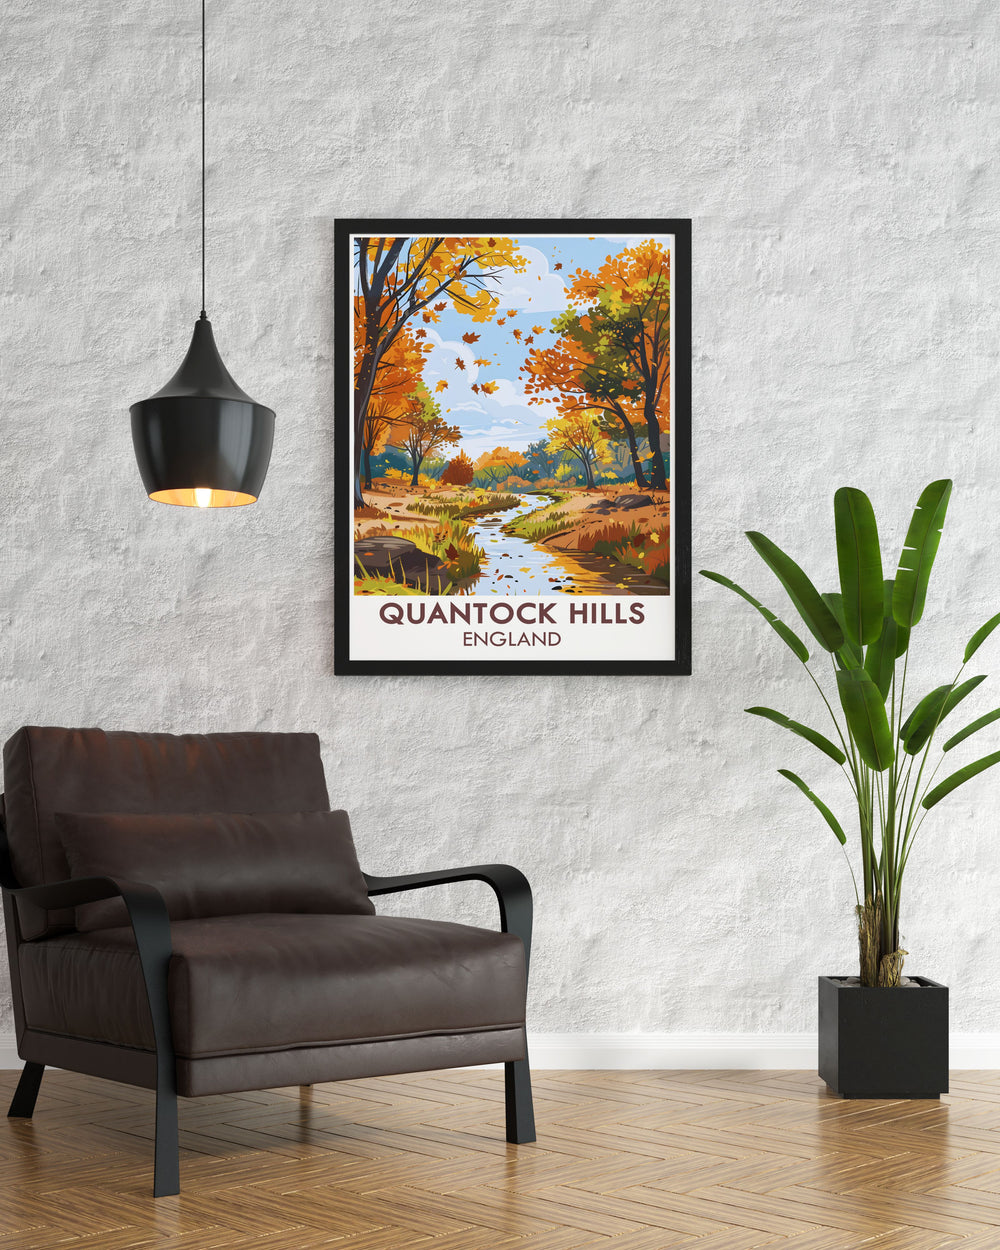 Holford Combe vintage travel poster featuring the tranquil landscapes of Quantock Hills and Somerset AONB ideal for adding a touch of rustic charm to any living space and capturing the essence of the Bristol Channel and The Quantocks.